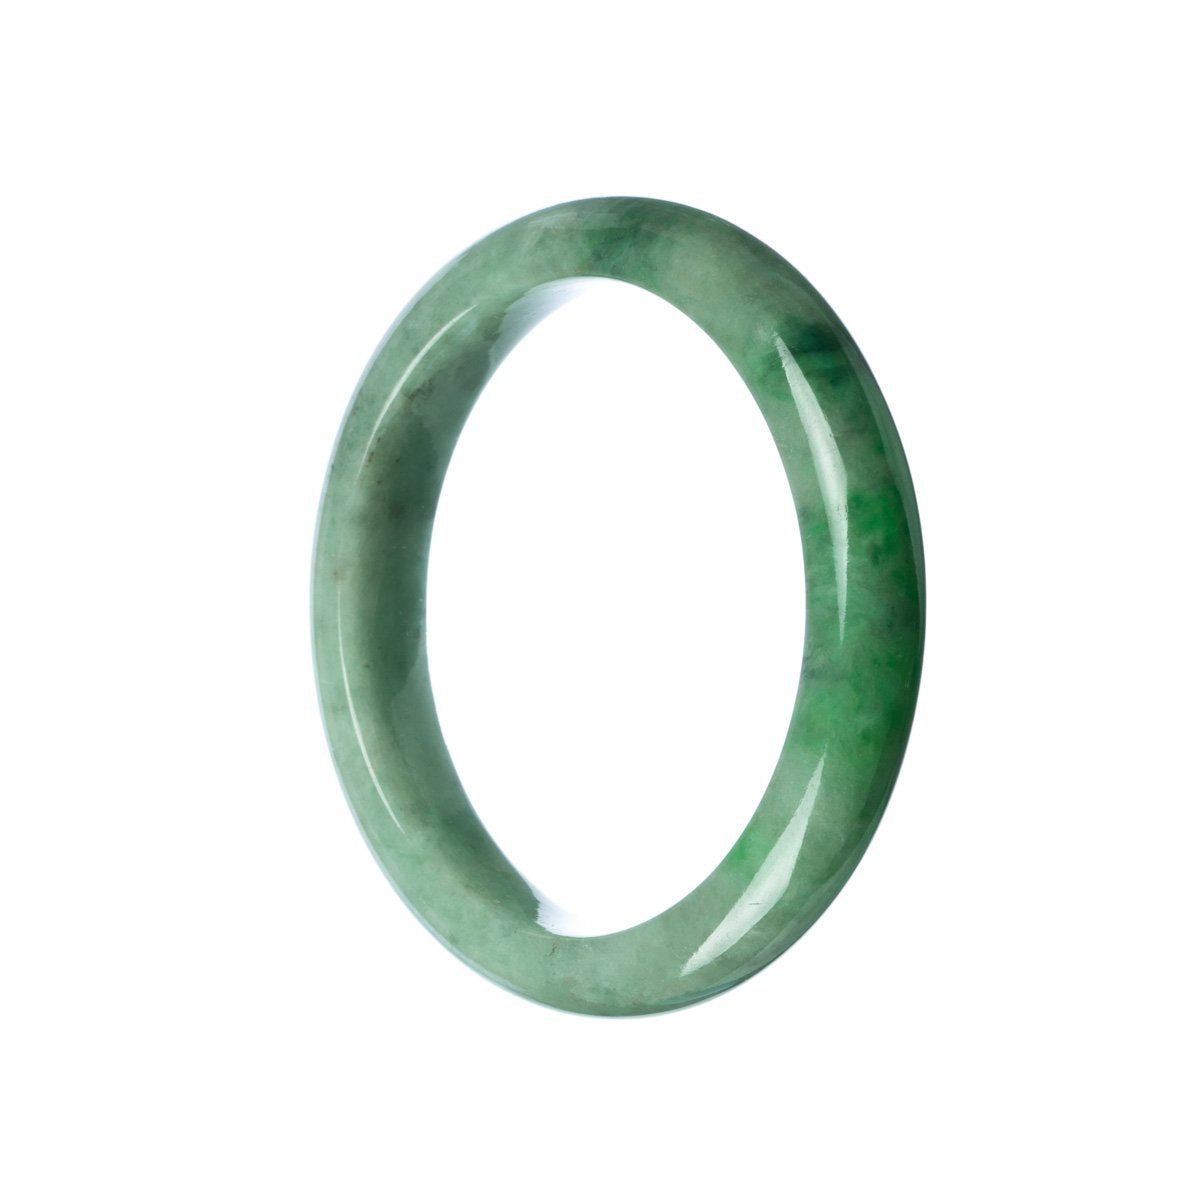 A close-up image of a beautiful green jade bangle with a semi-round shape, measuring 58mm in diameter. The bangle has a natural and authentic look, showcasing the unique beauty of Burma jade. Designed by MAYS™.